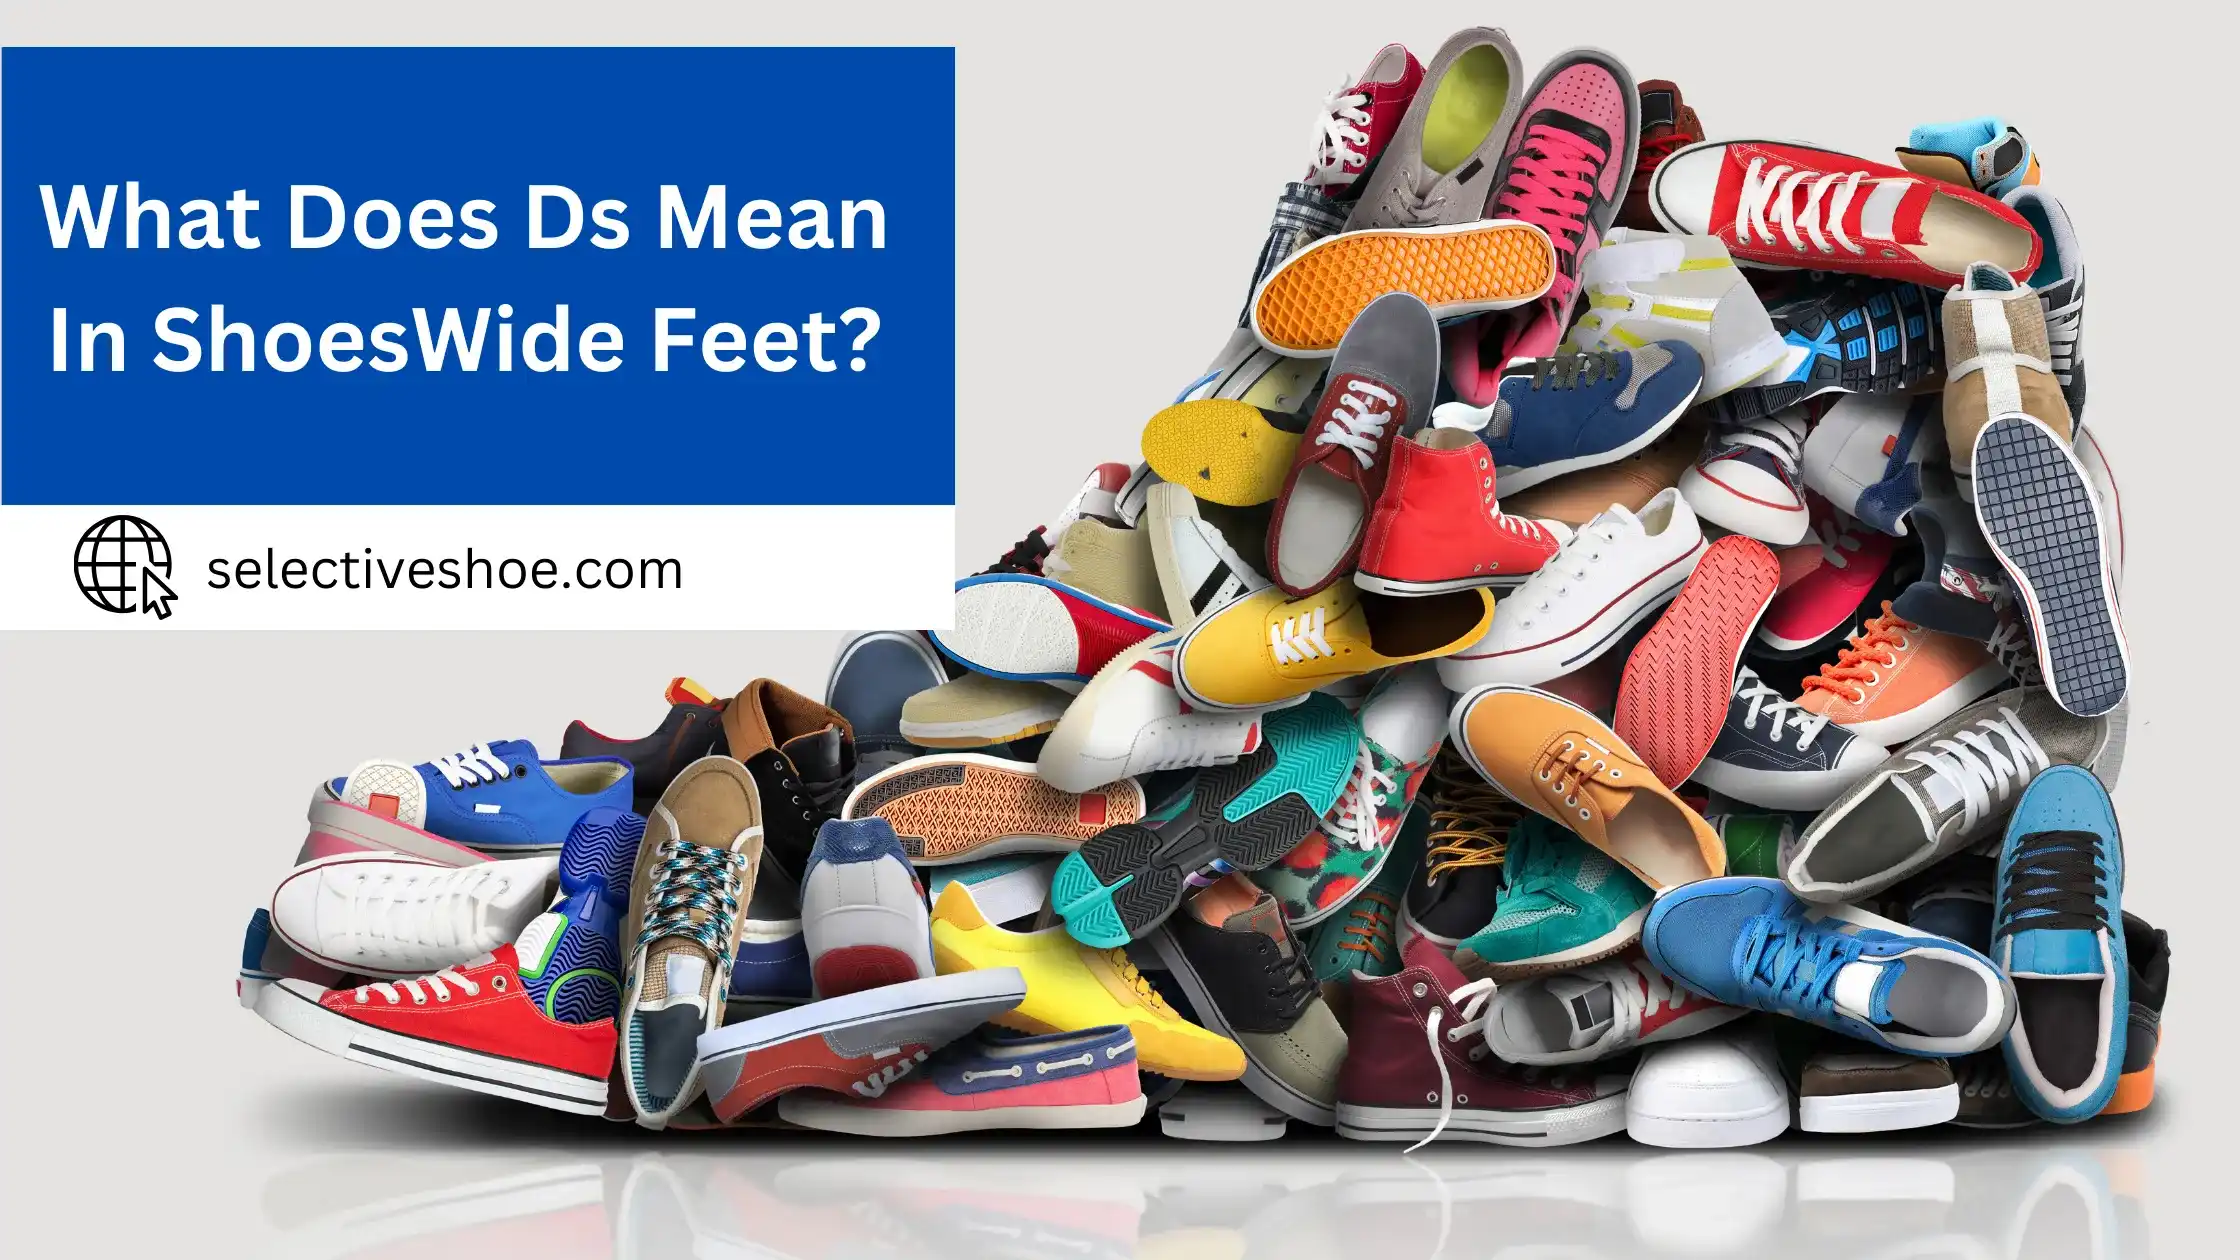 What Does Ds Mean In Shoes? (An In-Depth Guide)